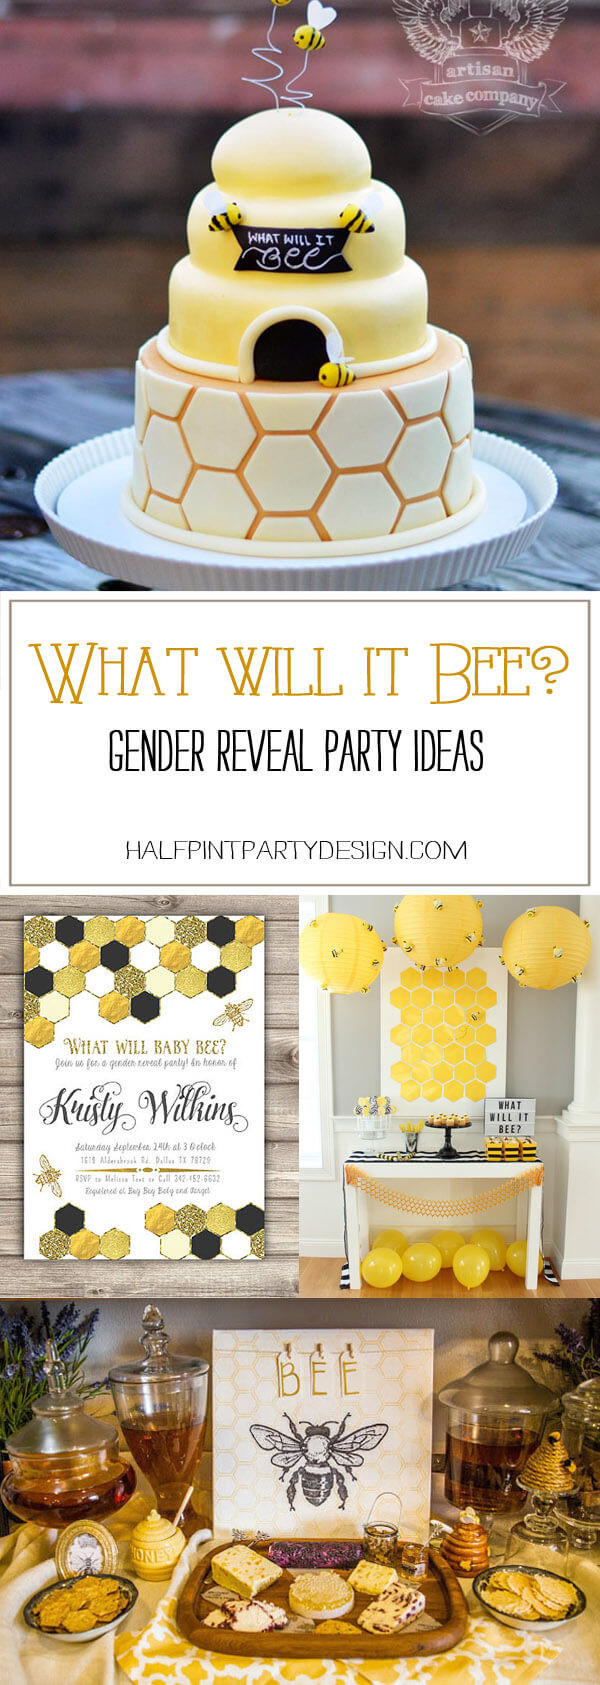 Good Ideas For A Gender Reveal Party
 What Will it Bee Gender Reveal Party Ideas Parties With